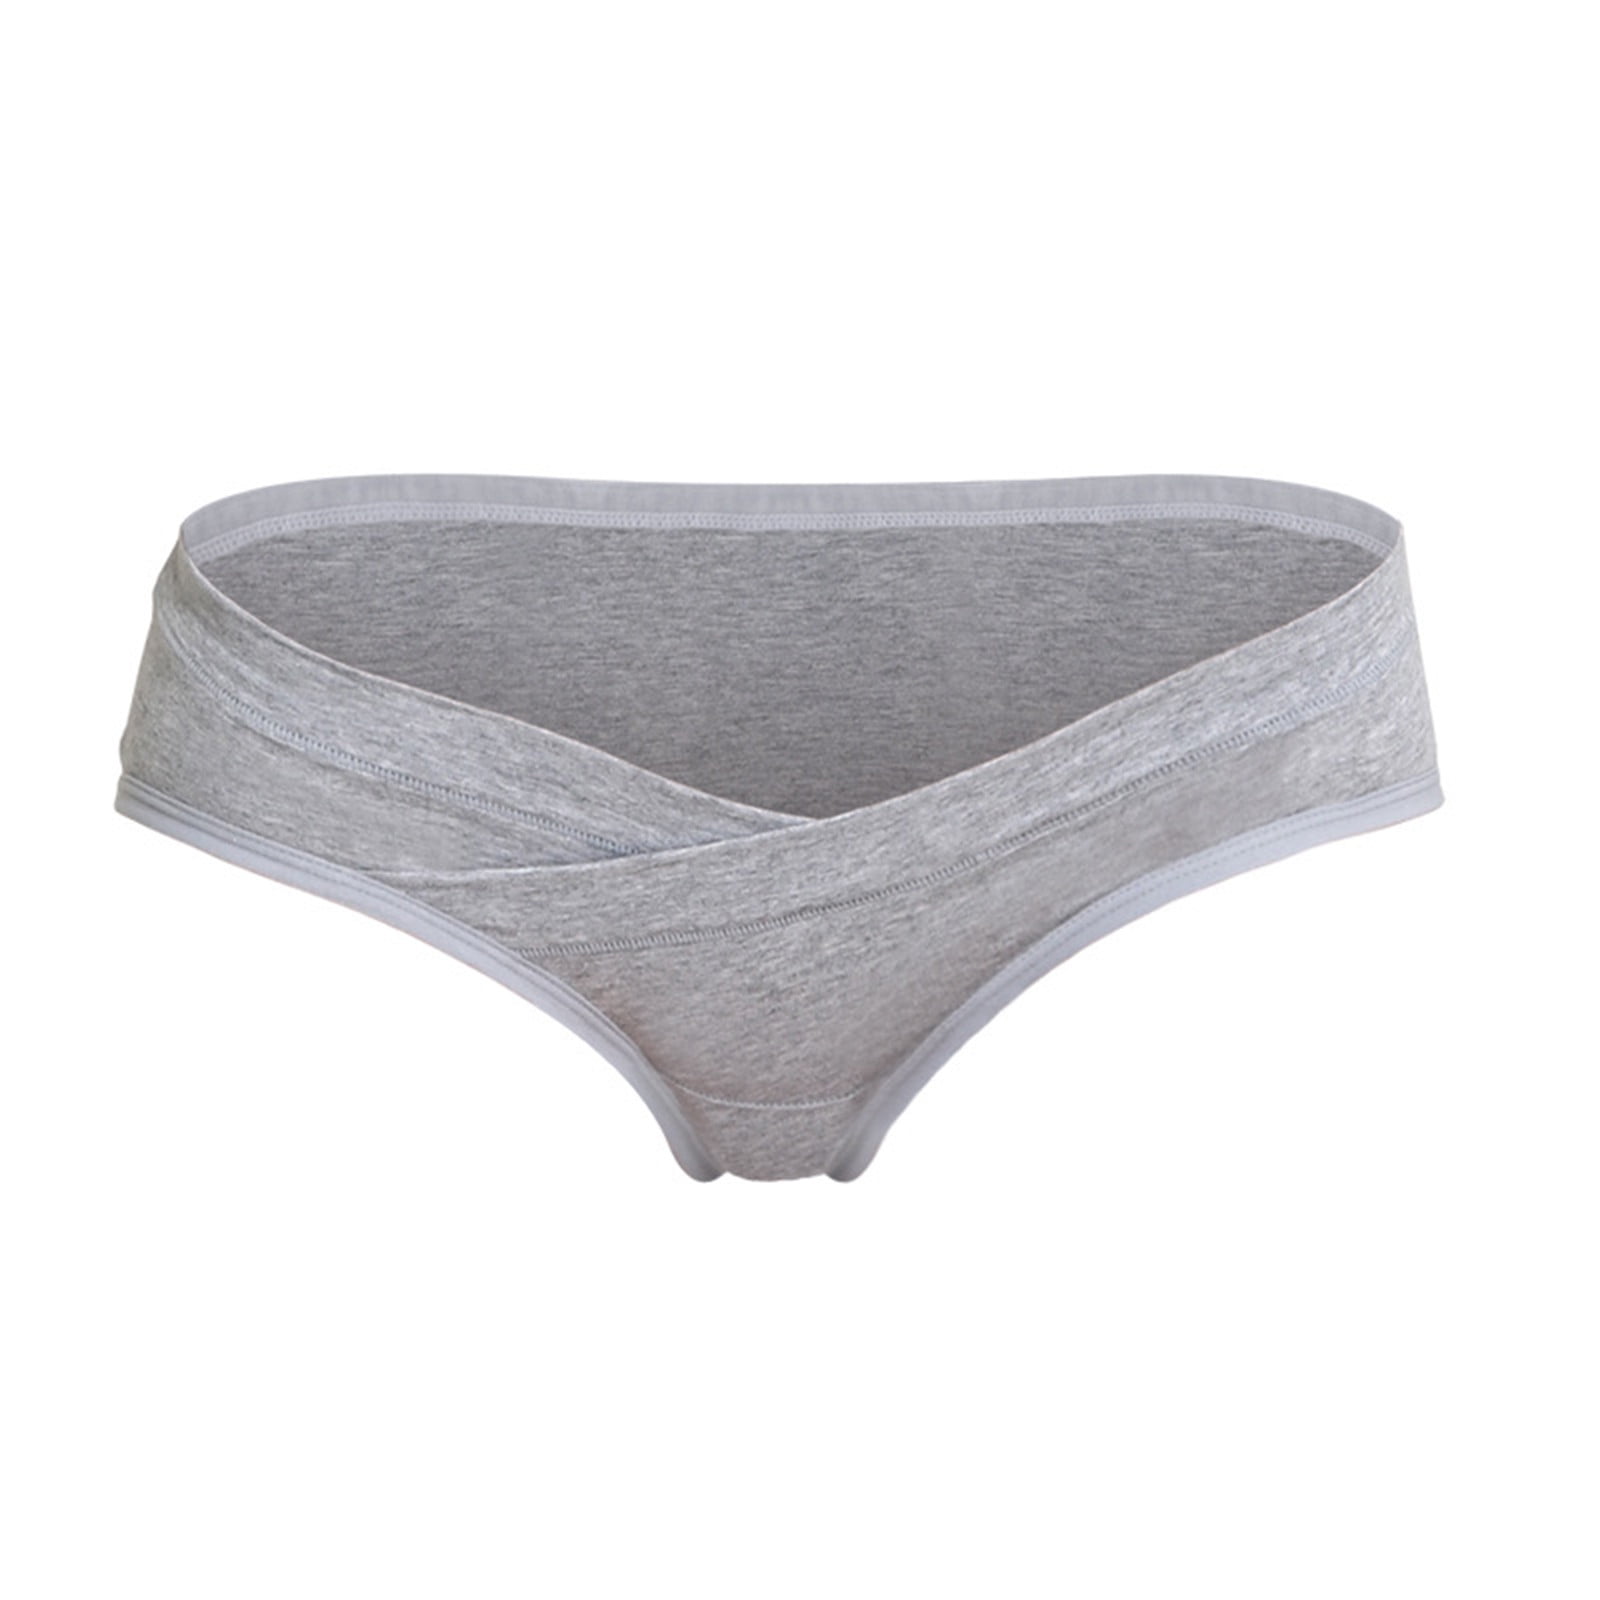 Aunt Flo Period Panties/Maternity with Pocket-Grey-3XL Gray : :  Clothing, Shoes & Accessories